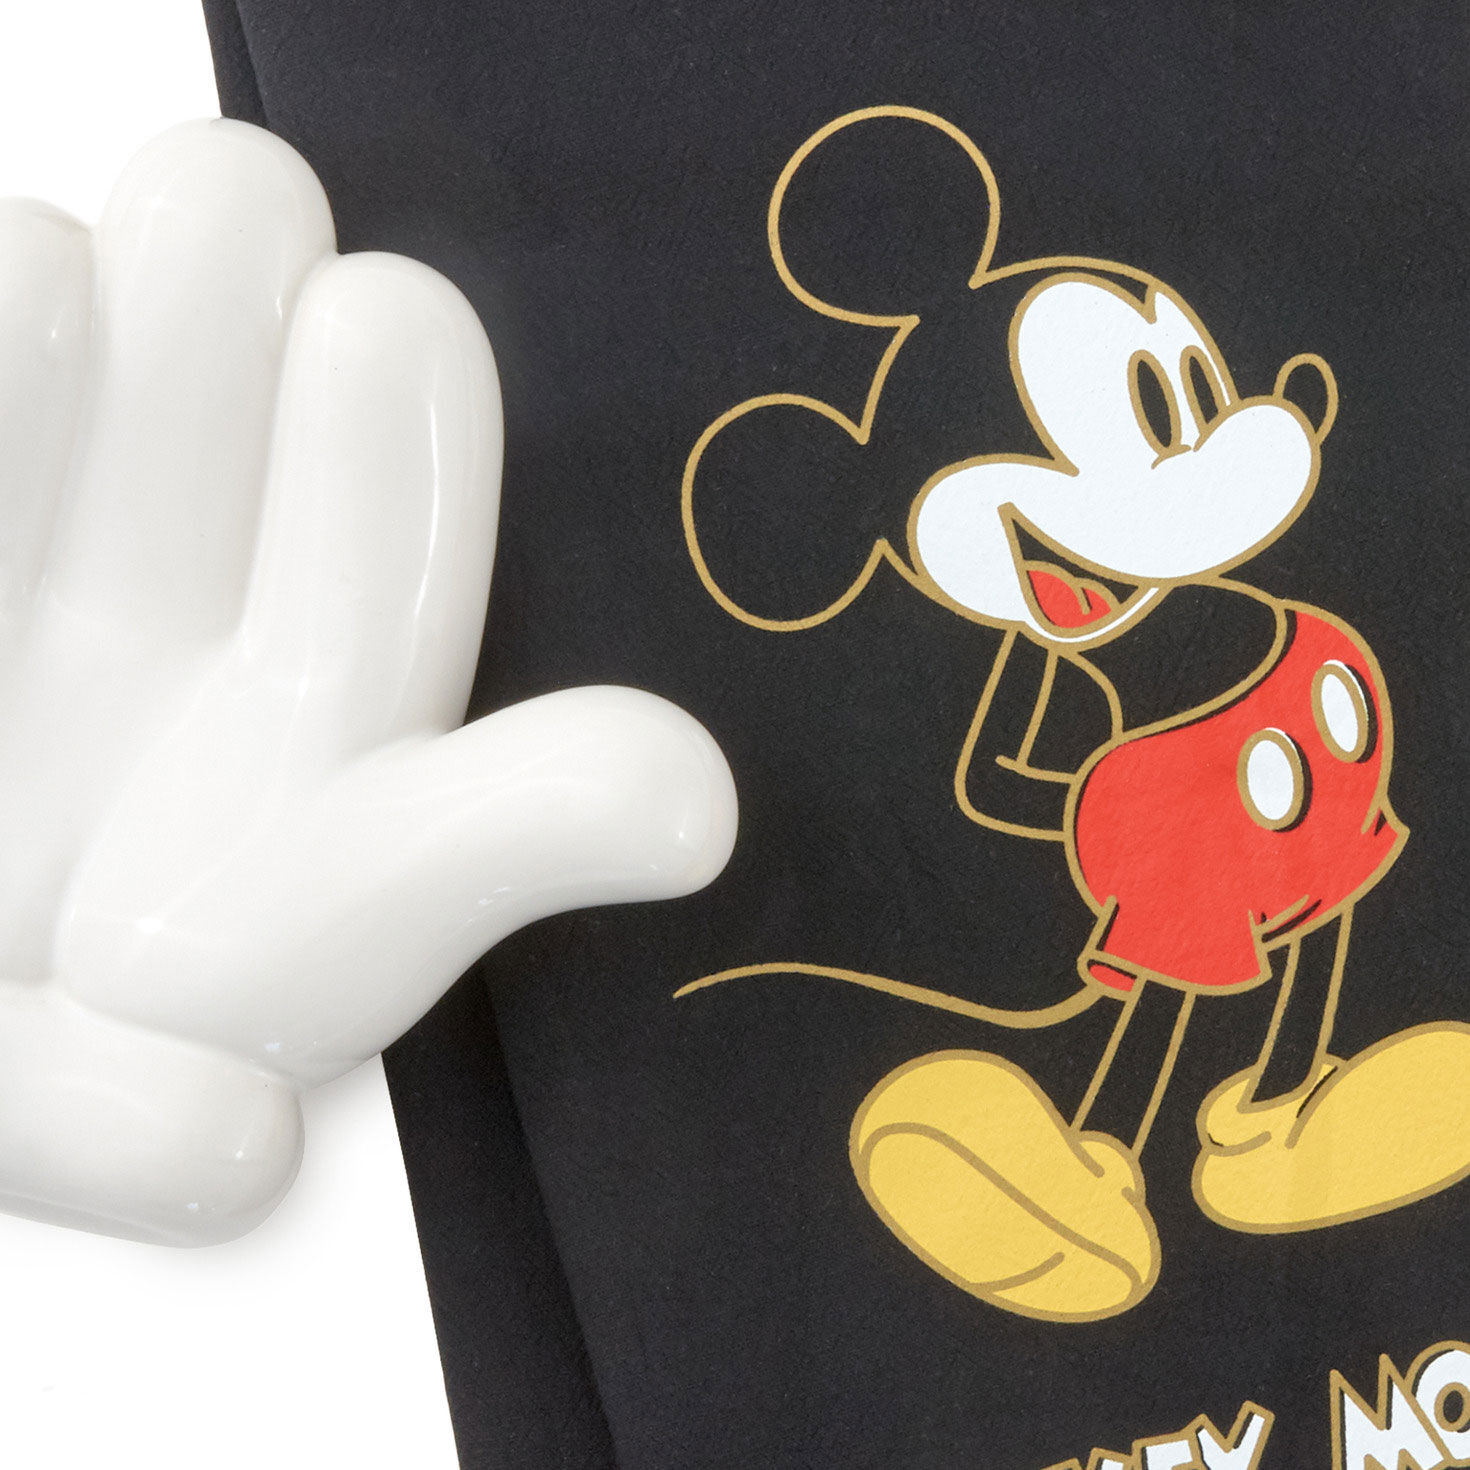 Disney Mickey Mouse Tea Towel With Spoon Rest for only USD 29.99 | Hallmark